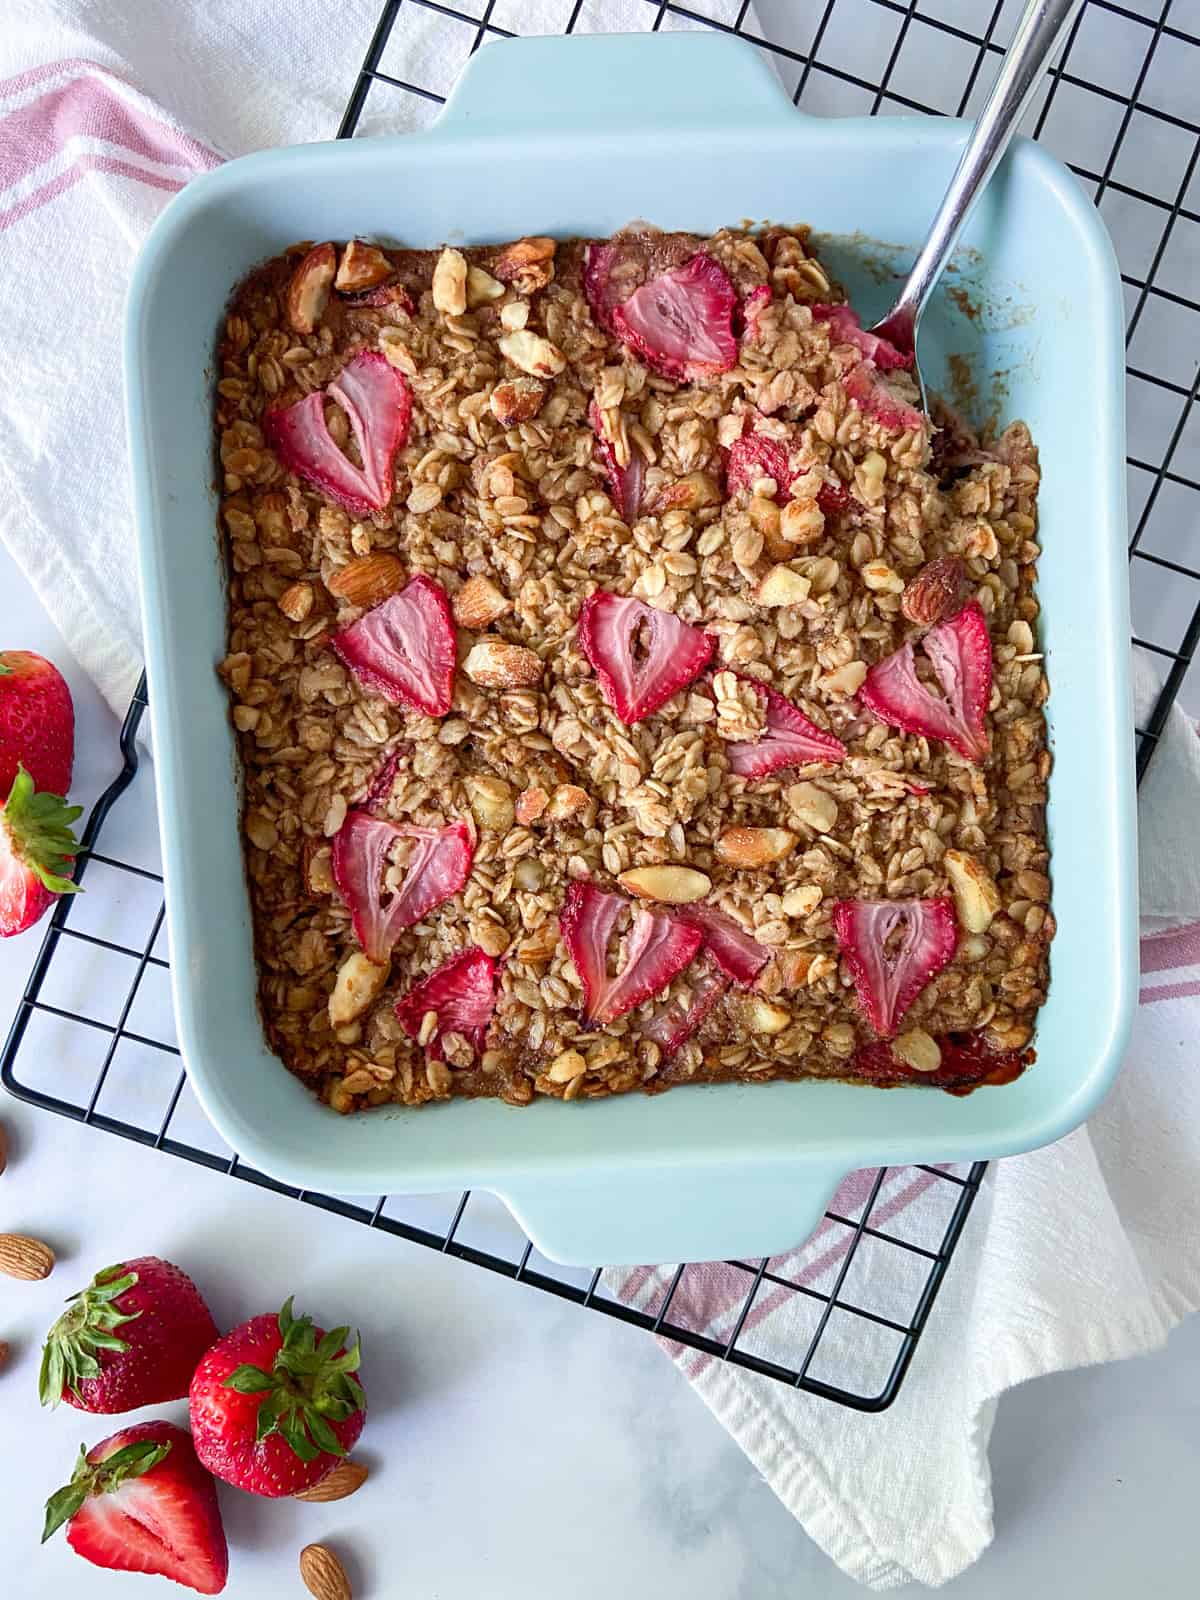 Strawberry baked oatmeal on a cooling rack.